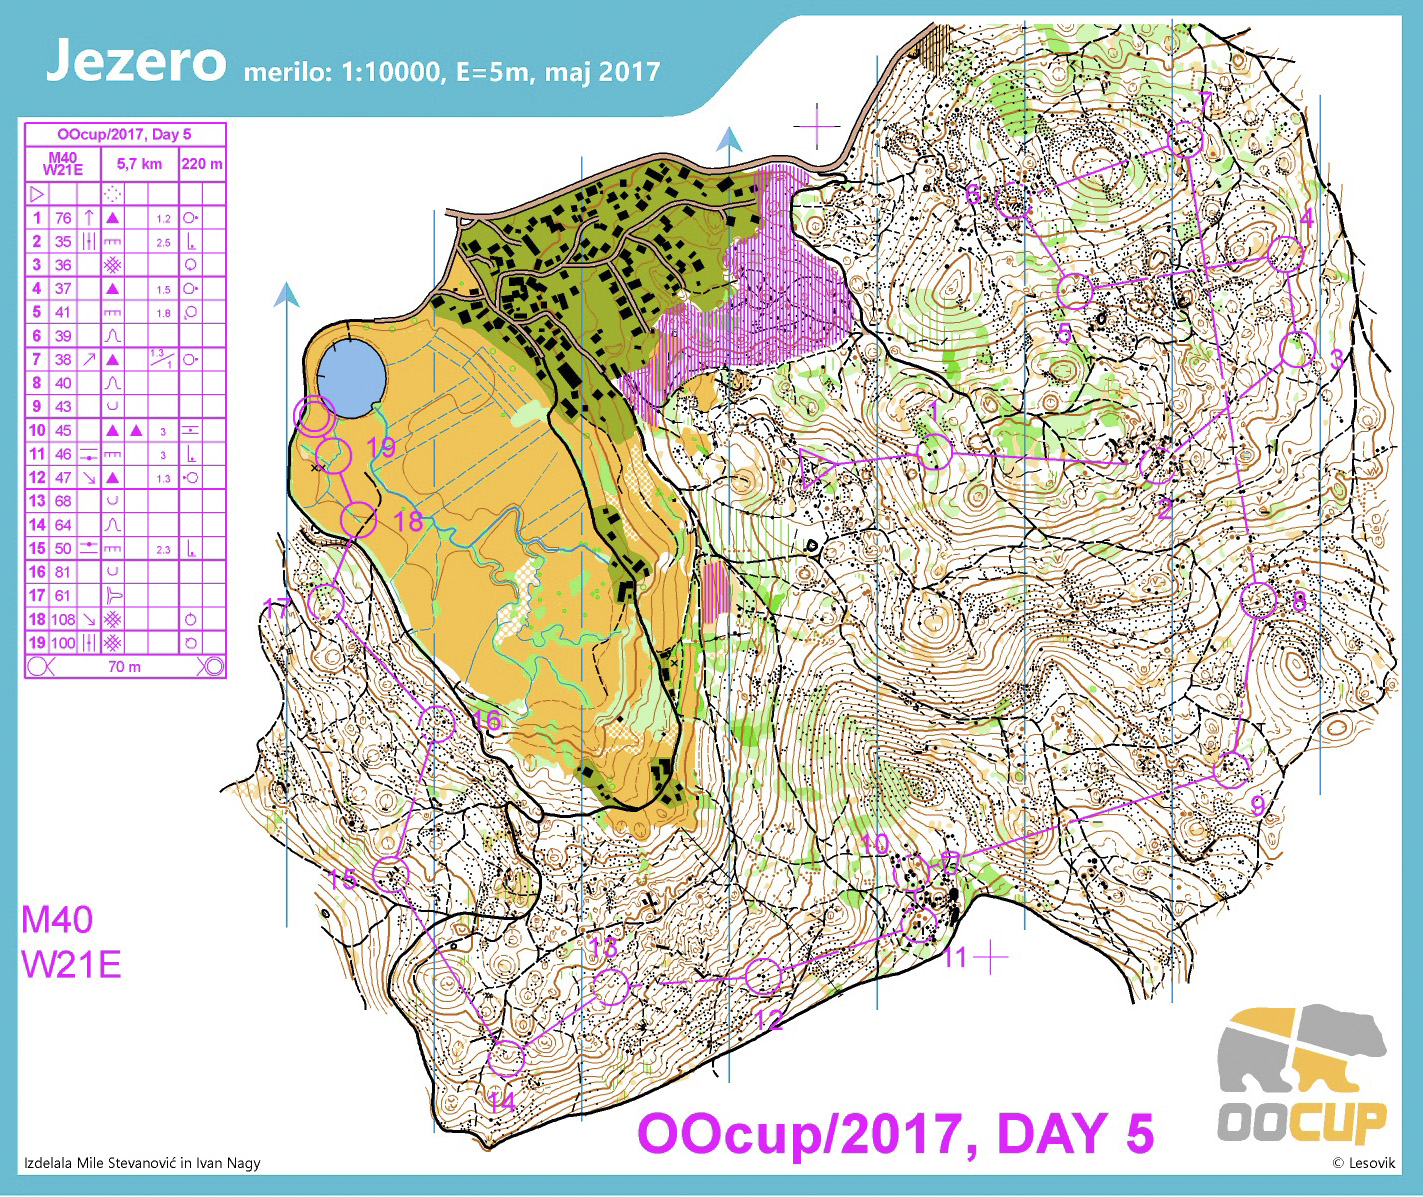 Oocup 2017 Day 5 (29/07/2017)